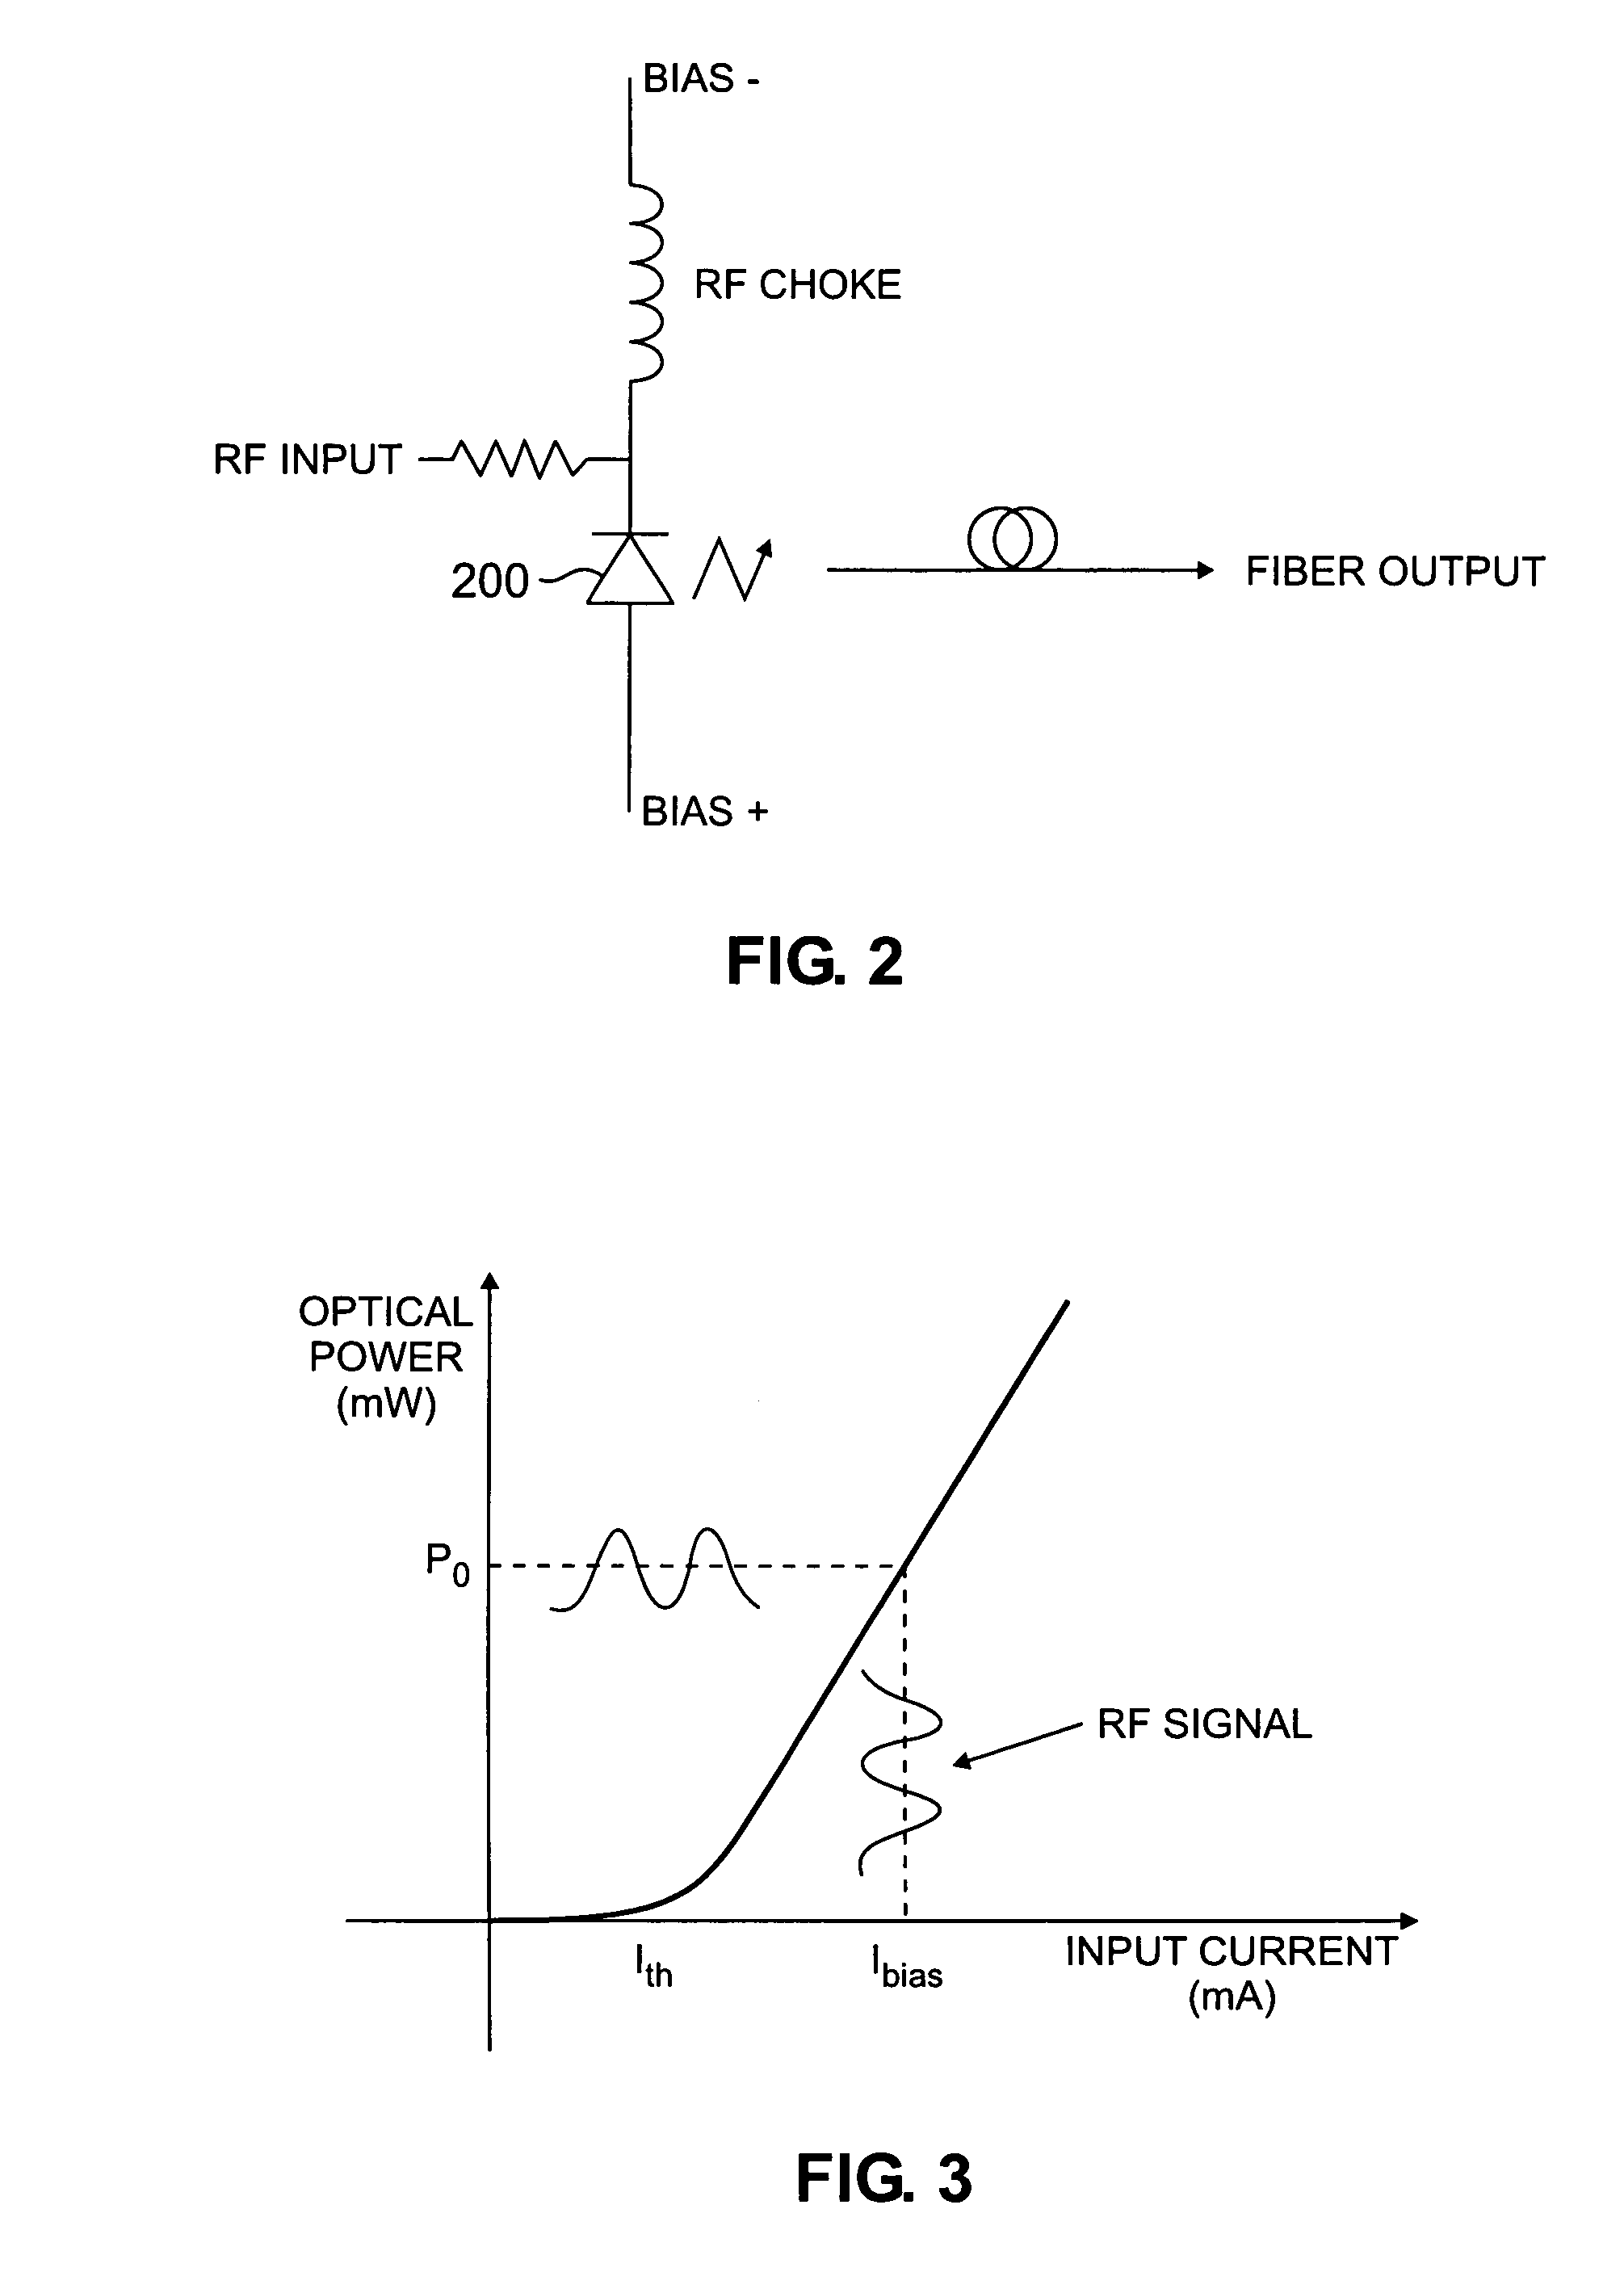 Pulse amplitude modulated transmission scheme for optical channels with soft decision decoding